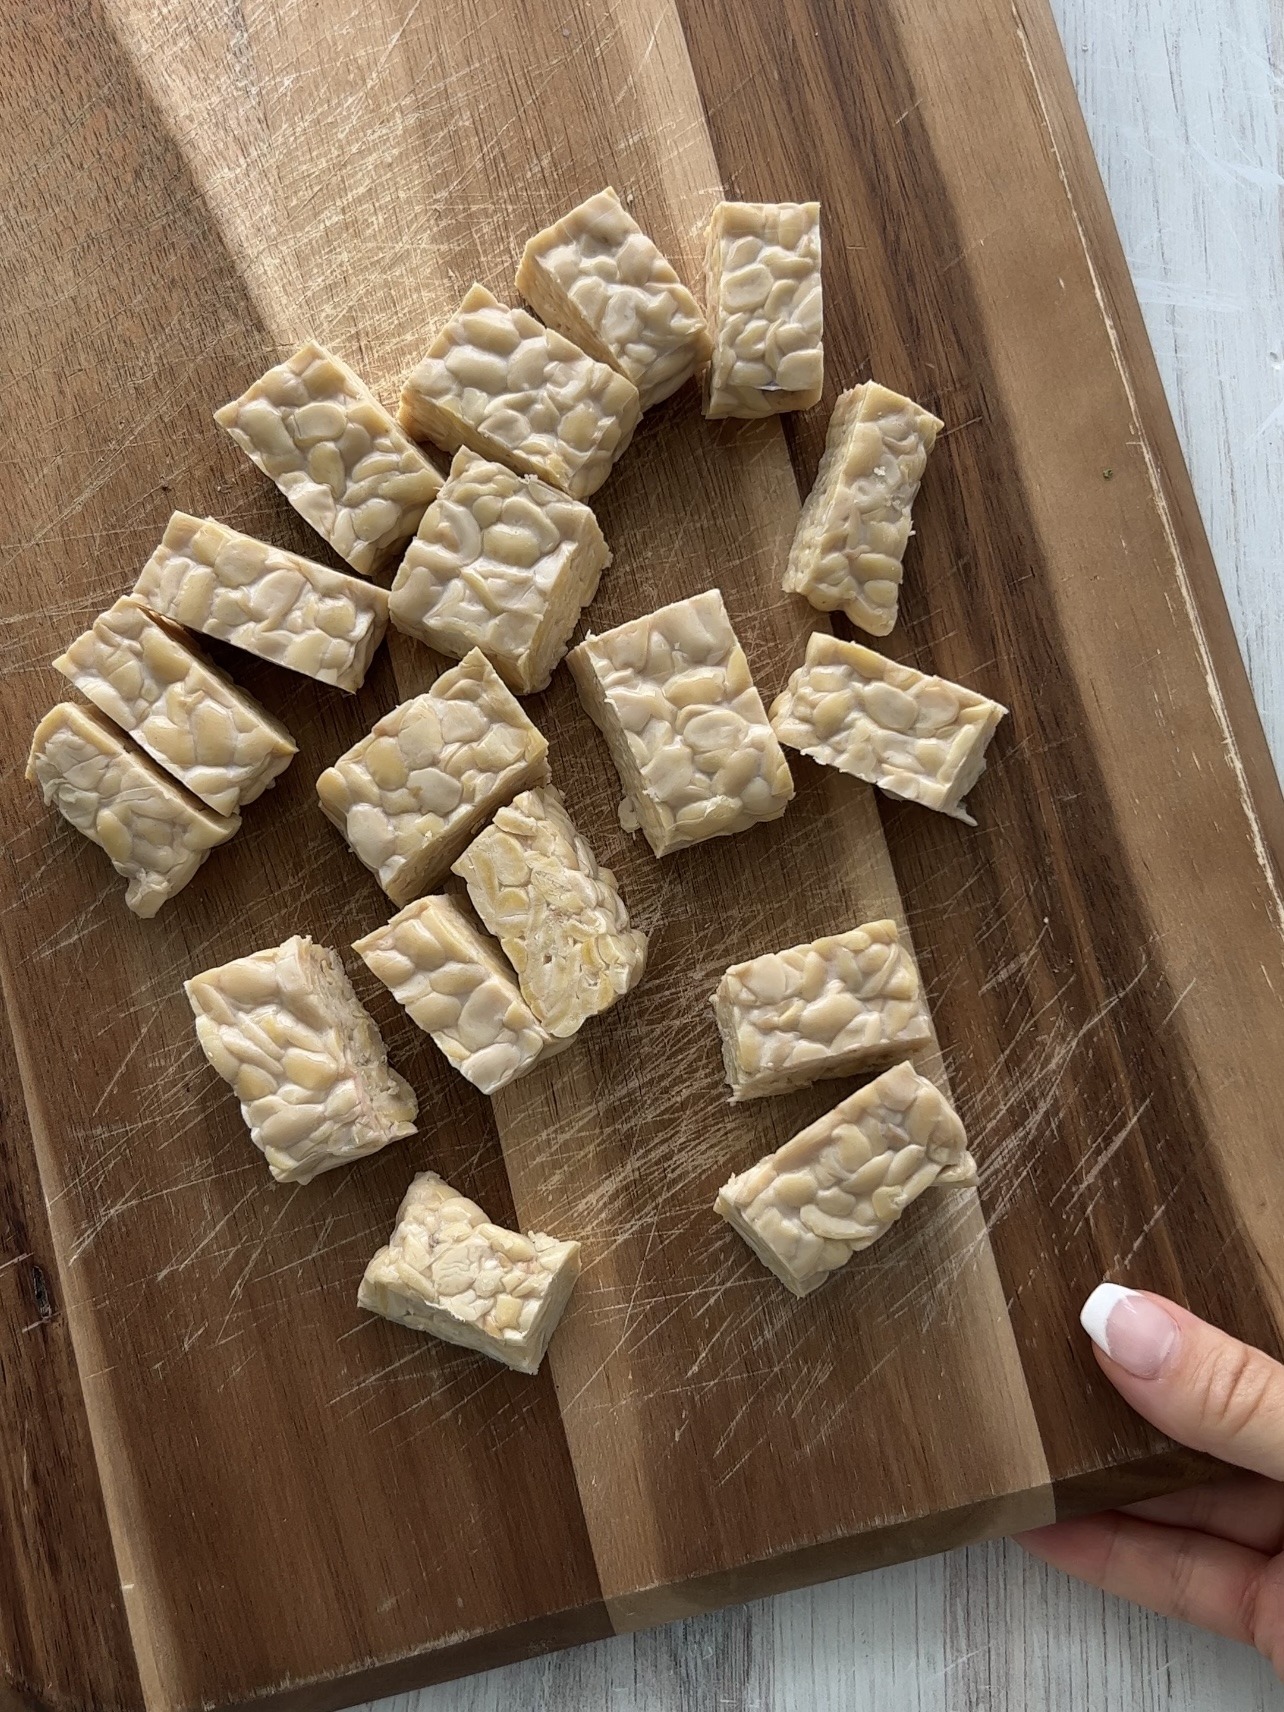 tempeh on cutting board after cutting it